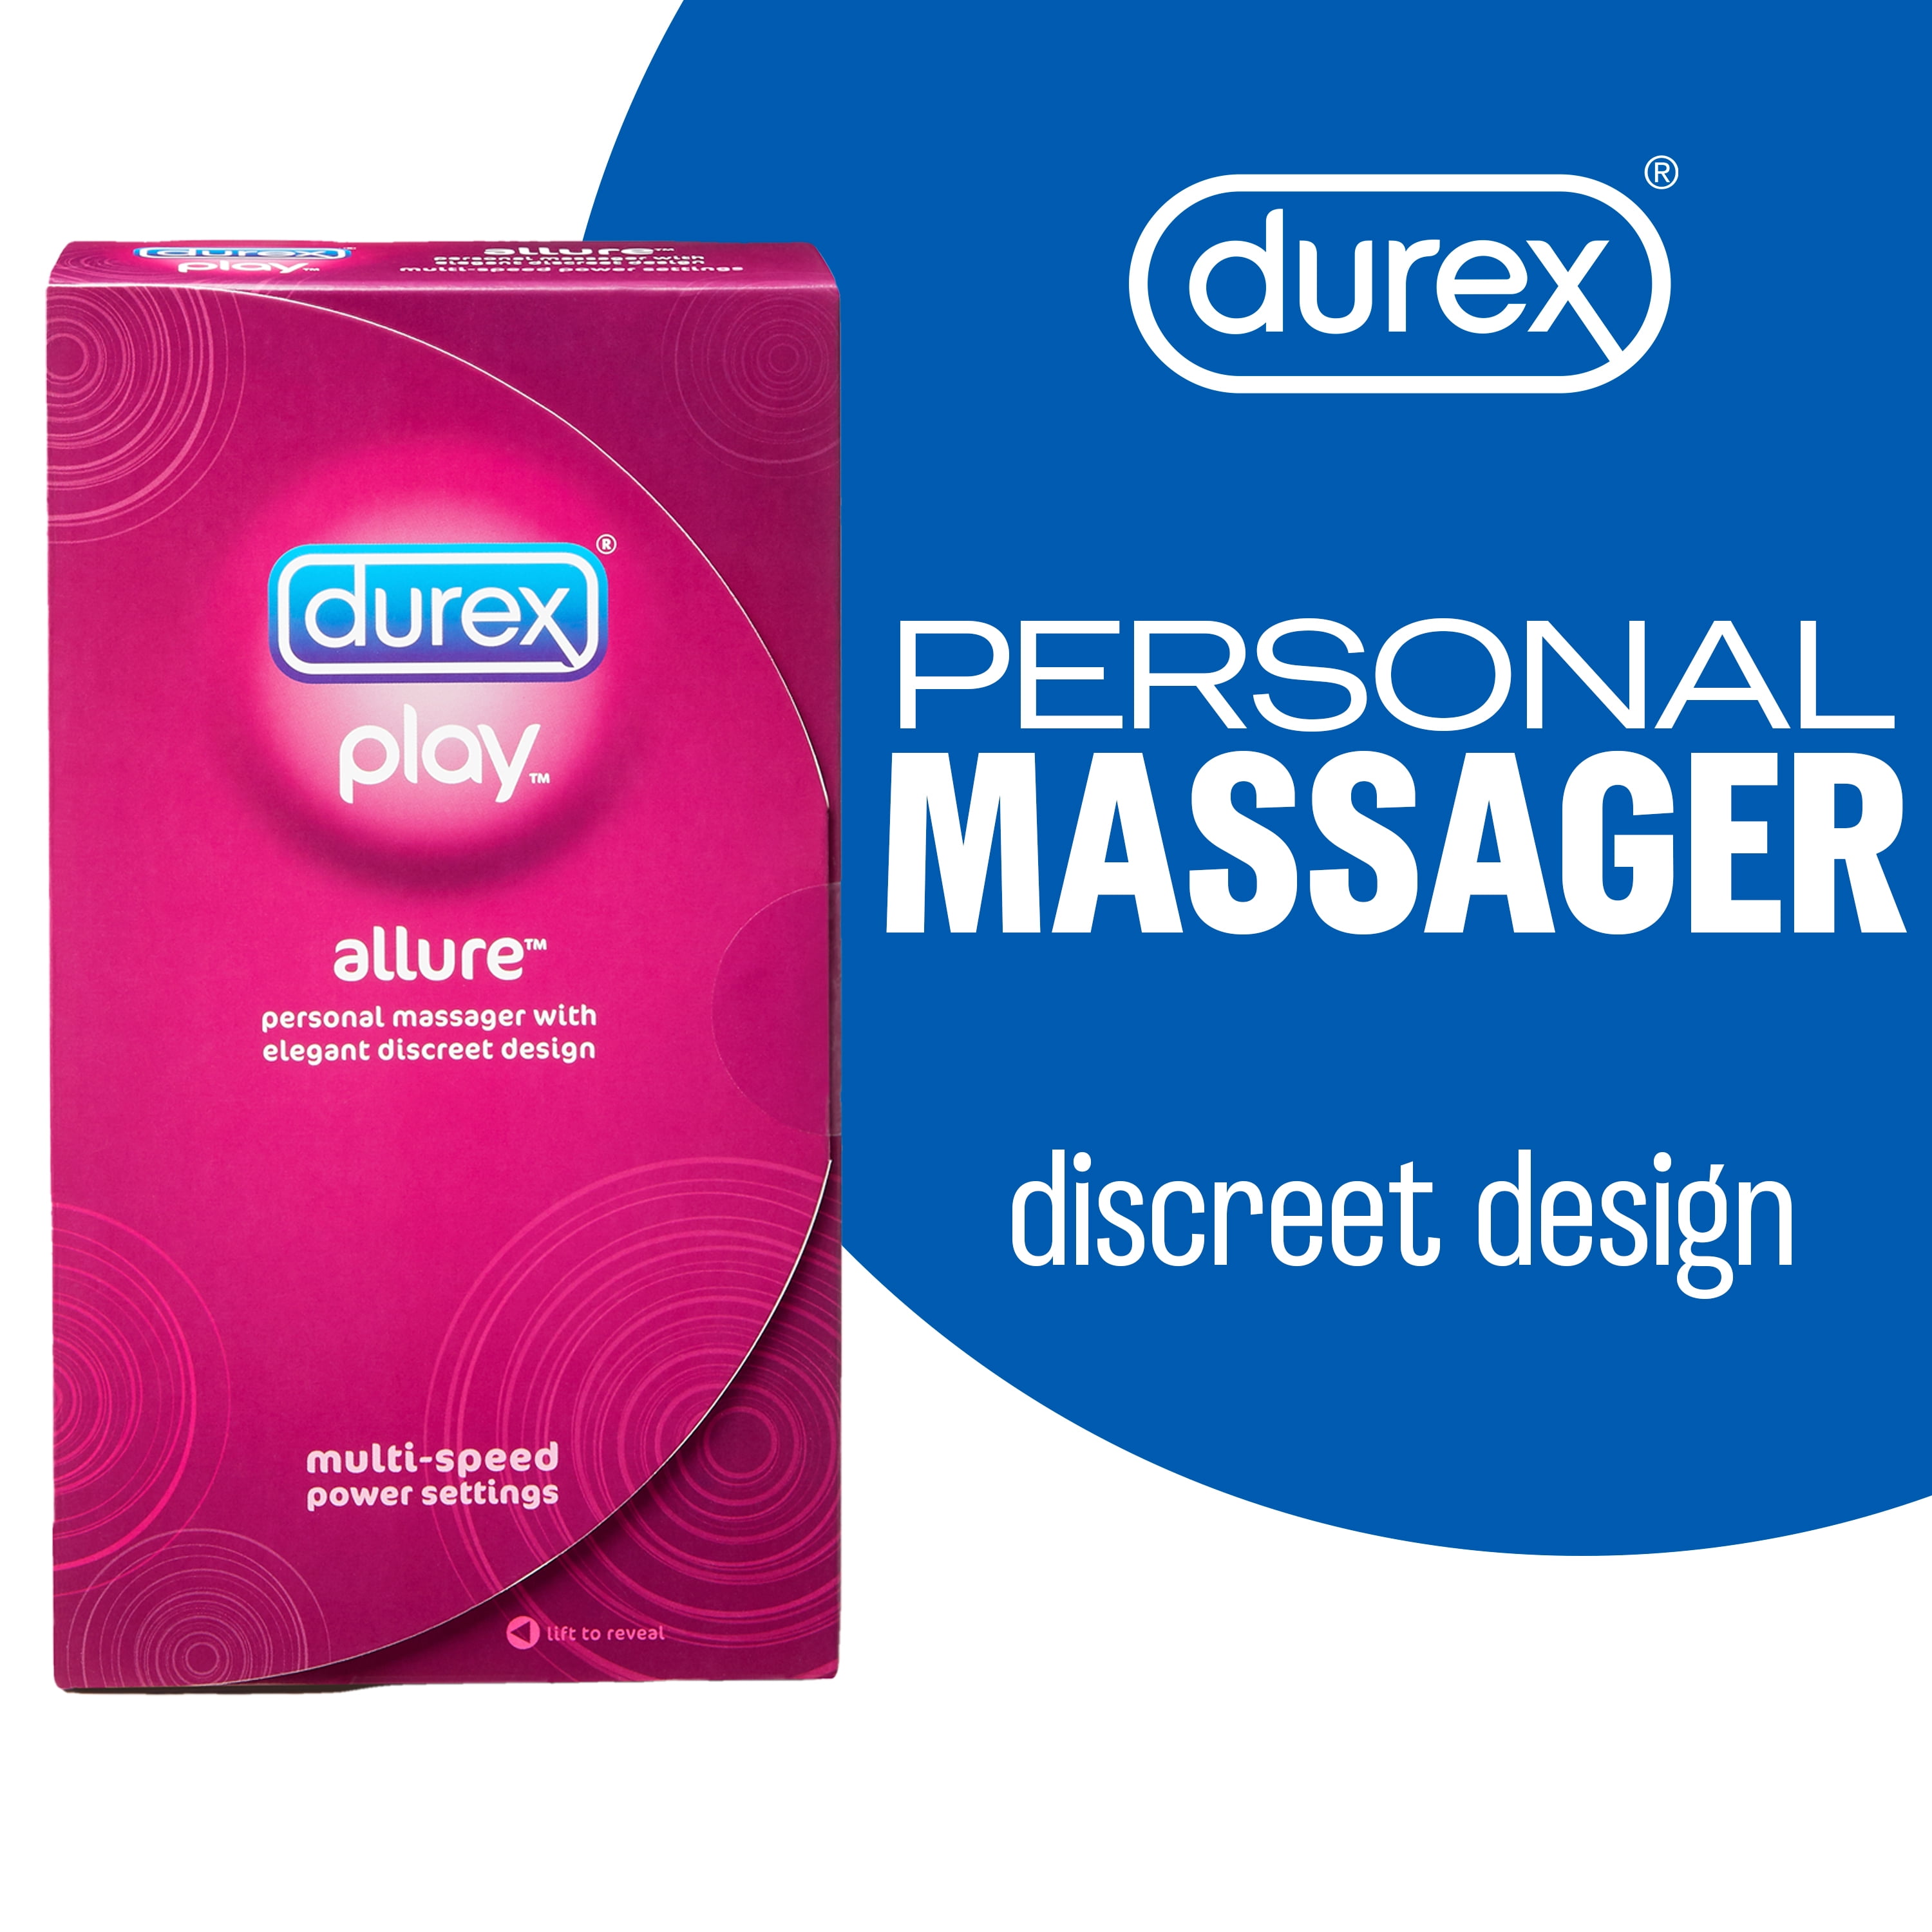 Durex Play Allure Vibrating Personal Massager Vibrator, 1 Count image